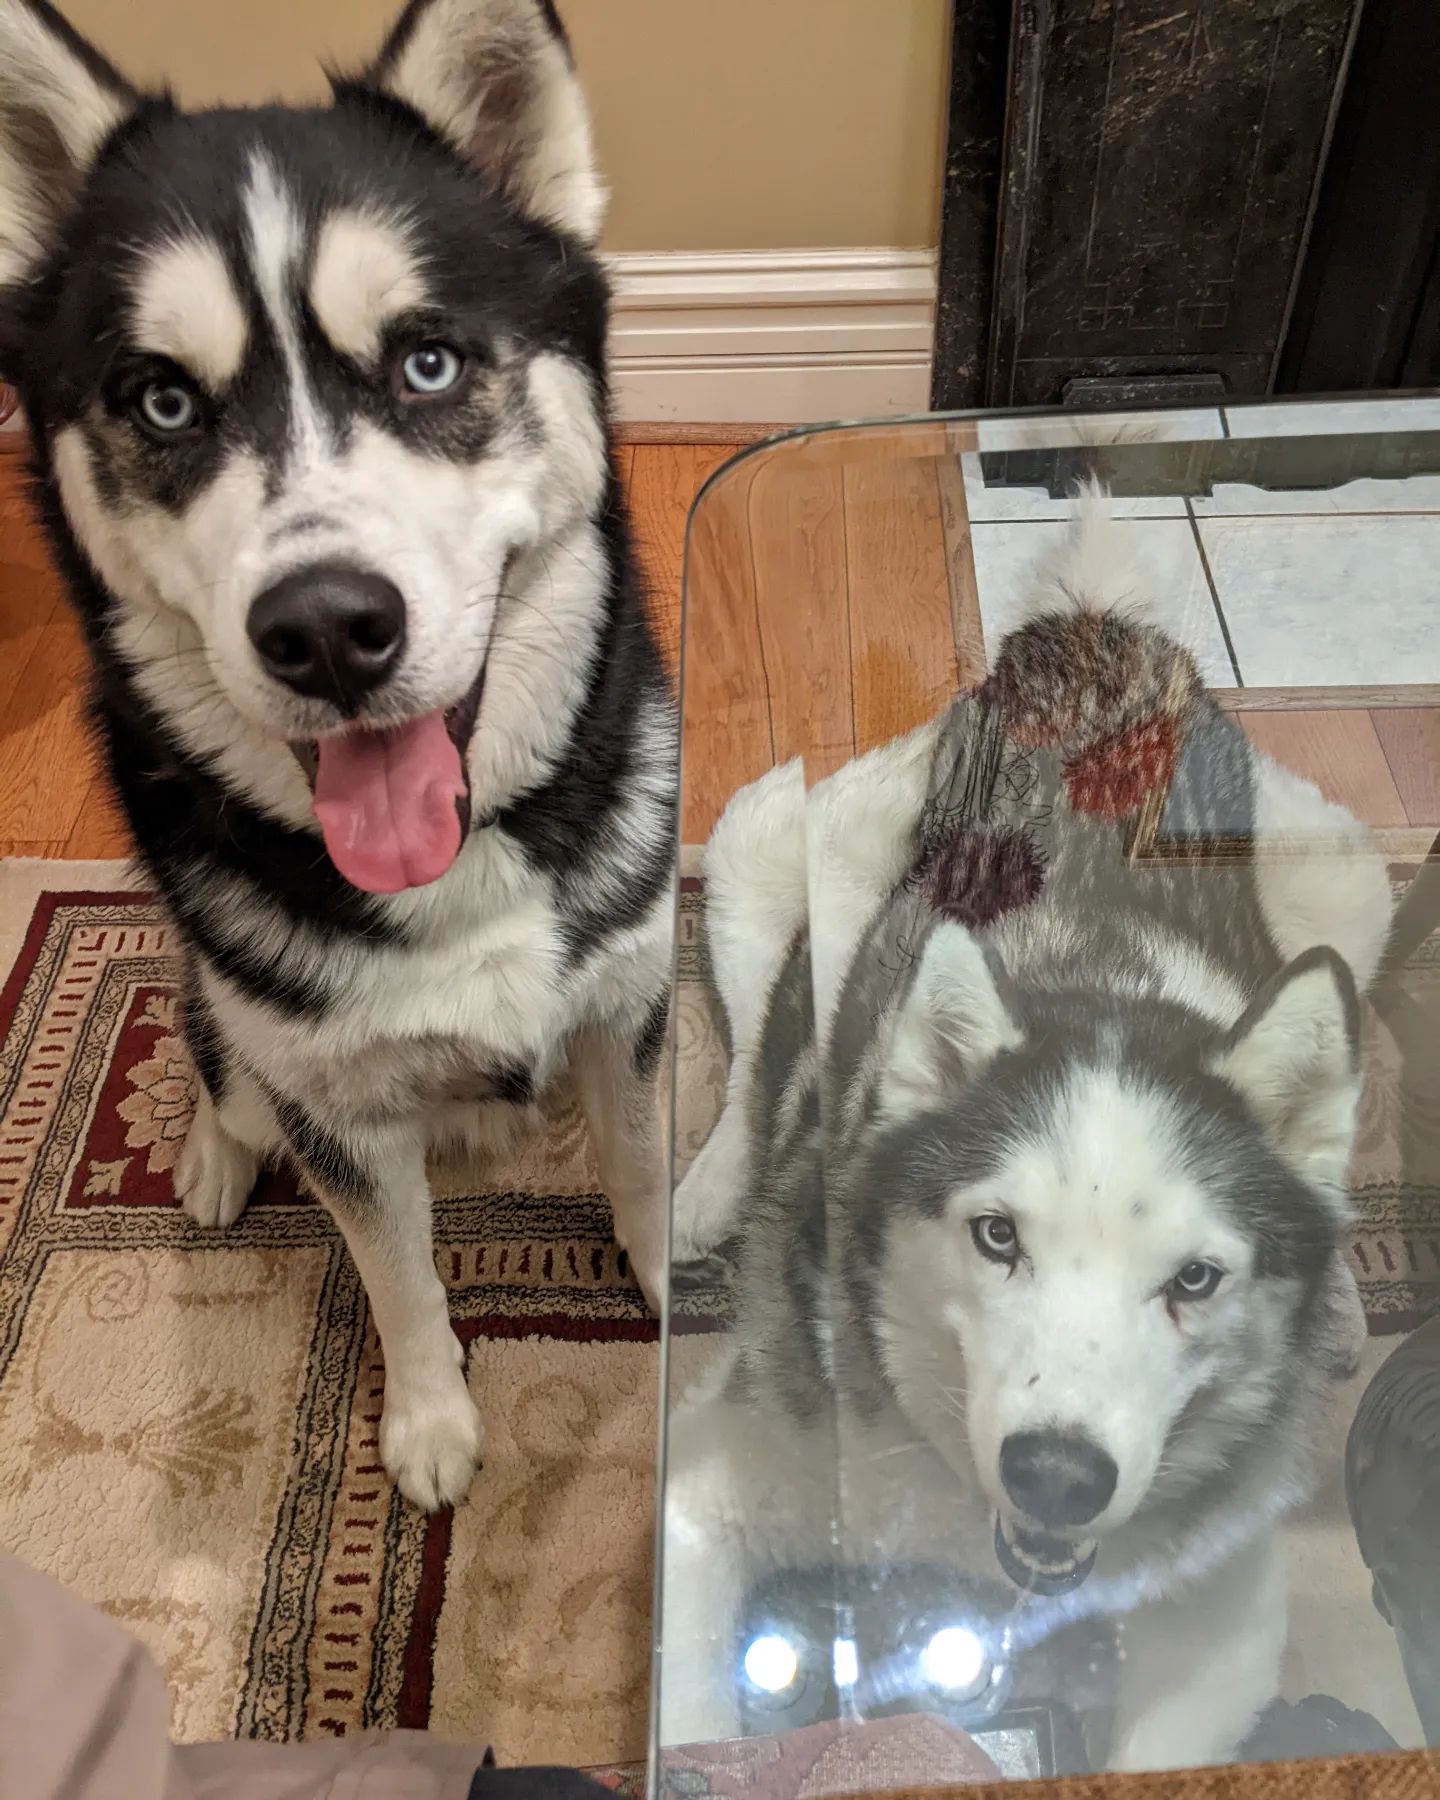 And this is what happens when I'm gone for a week and try to eat when I get home lol #siberianhusky #huskiesofinstagram #stlnanuq #stlloki